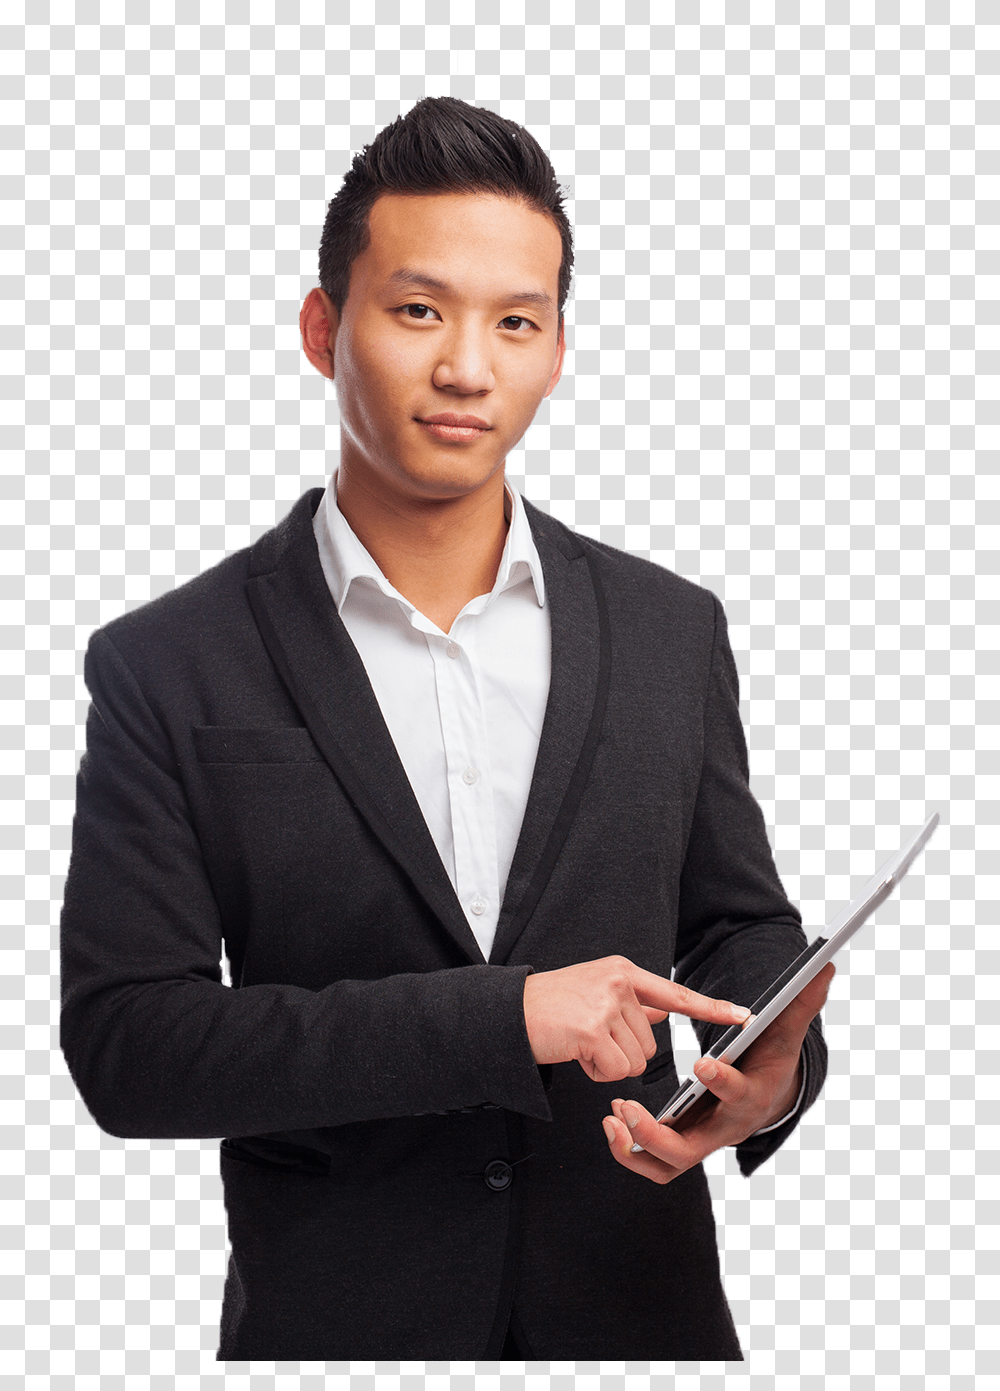 Man In Suit Crossing Arms, Overcoat, Person, Blazer Transparent Png